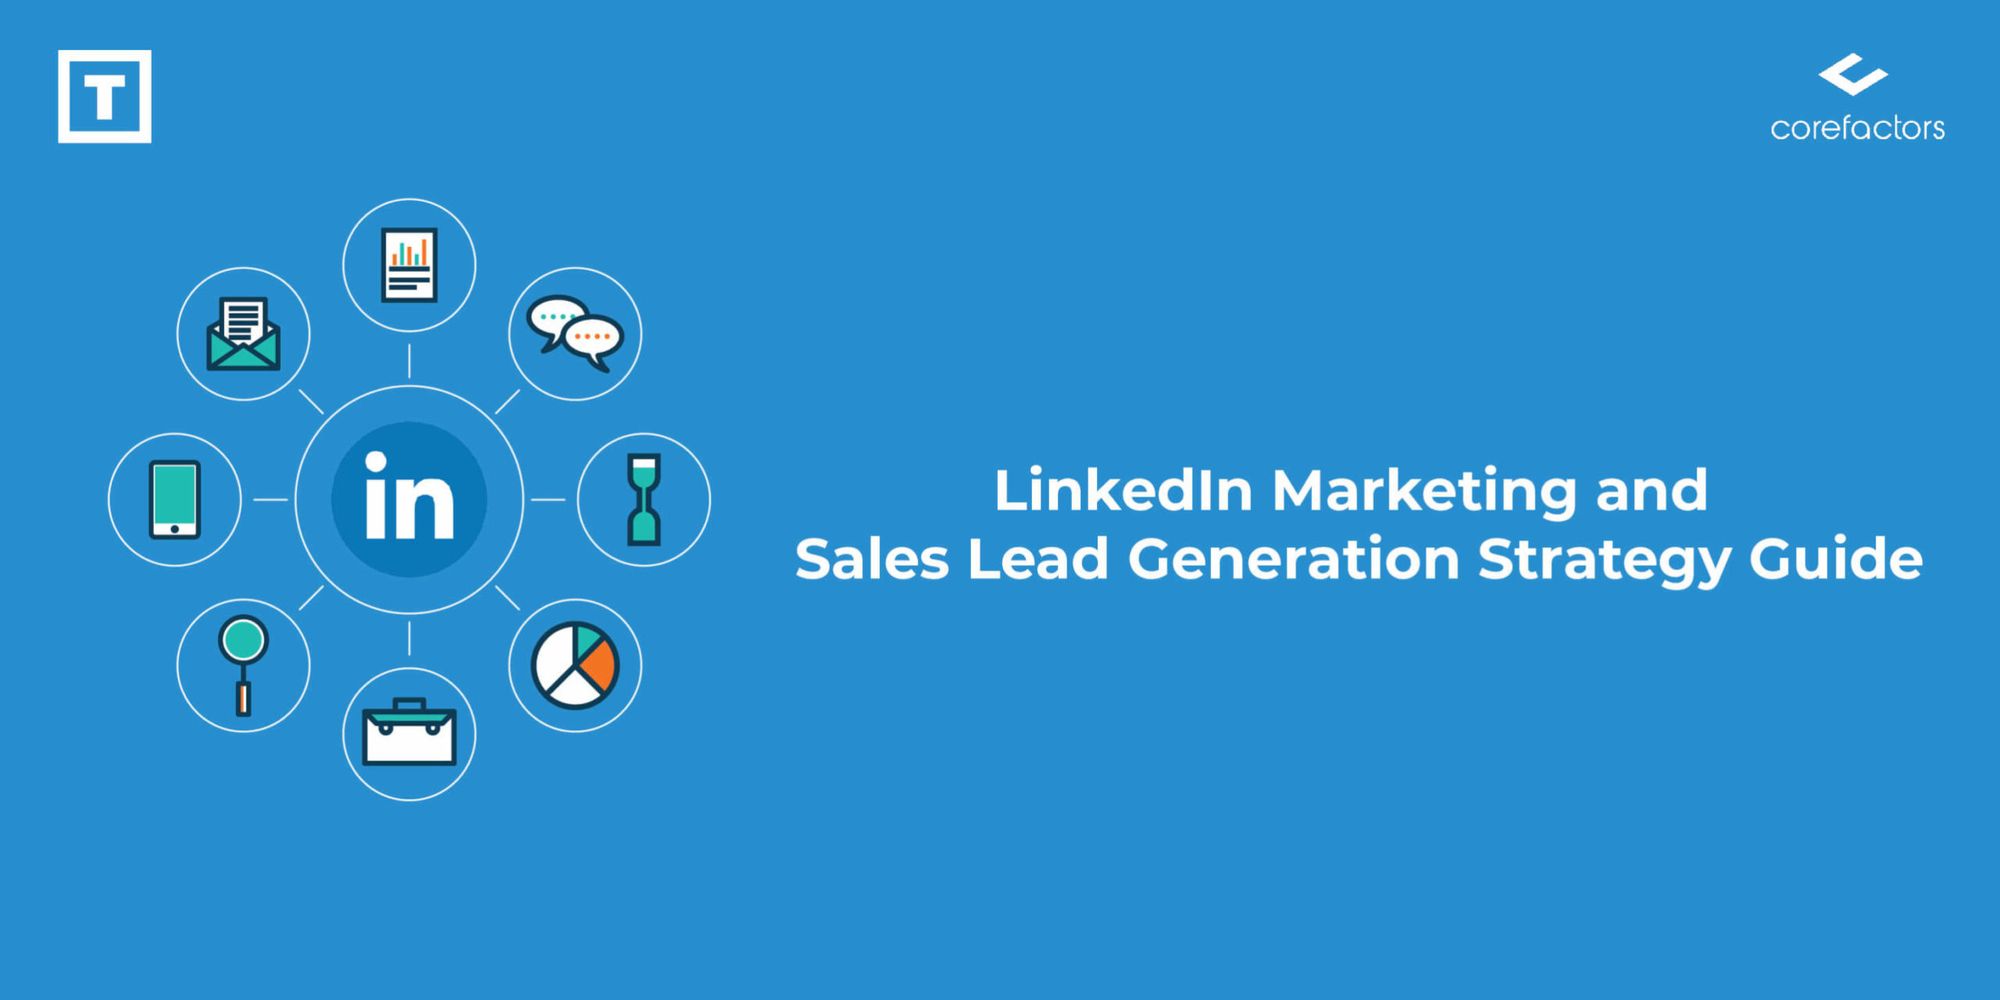 LinkedIn Marketing and Sales Lead Generation Strategy Guide